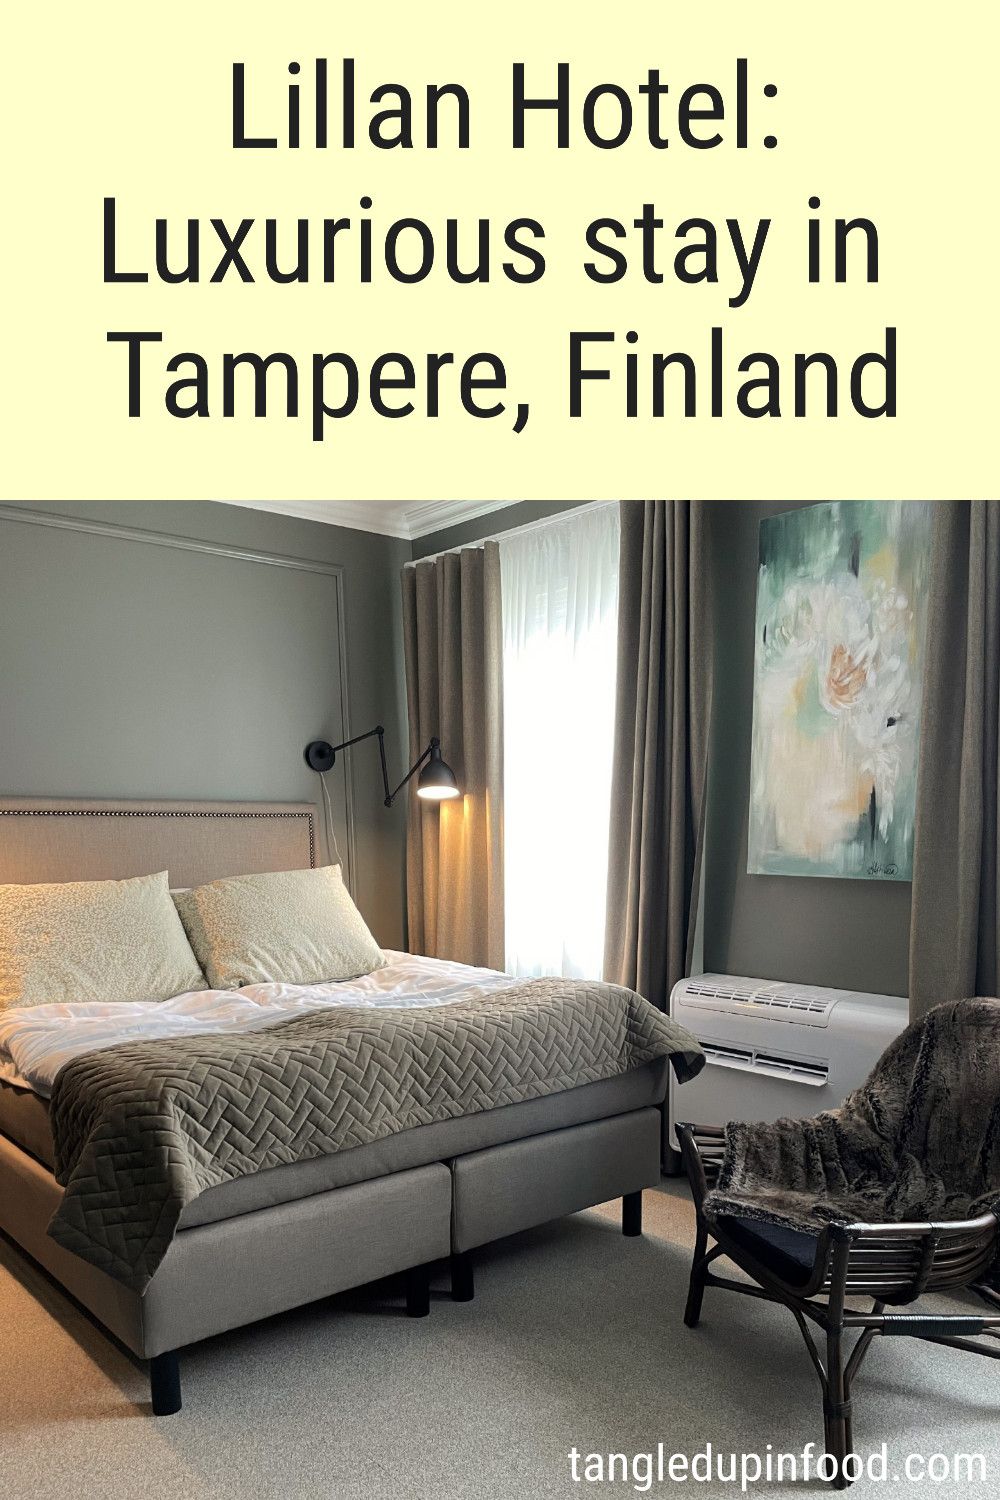 Photo of hotel room and text reading "Lillan Hotel: Luxurious Stay in Tampere, Finland"